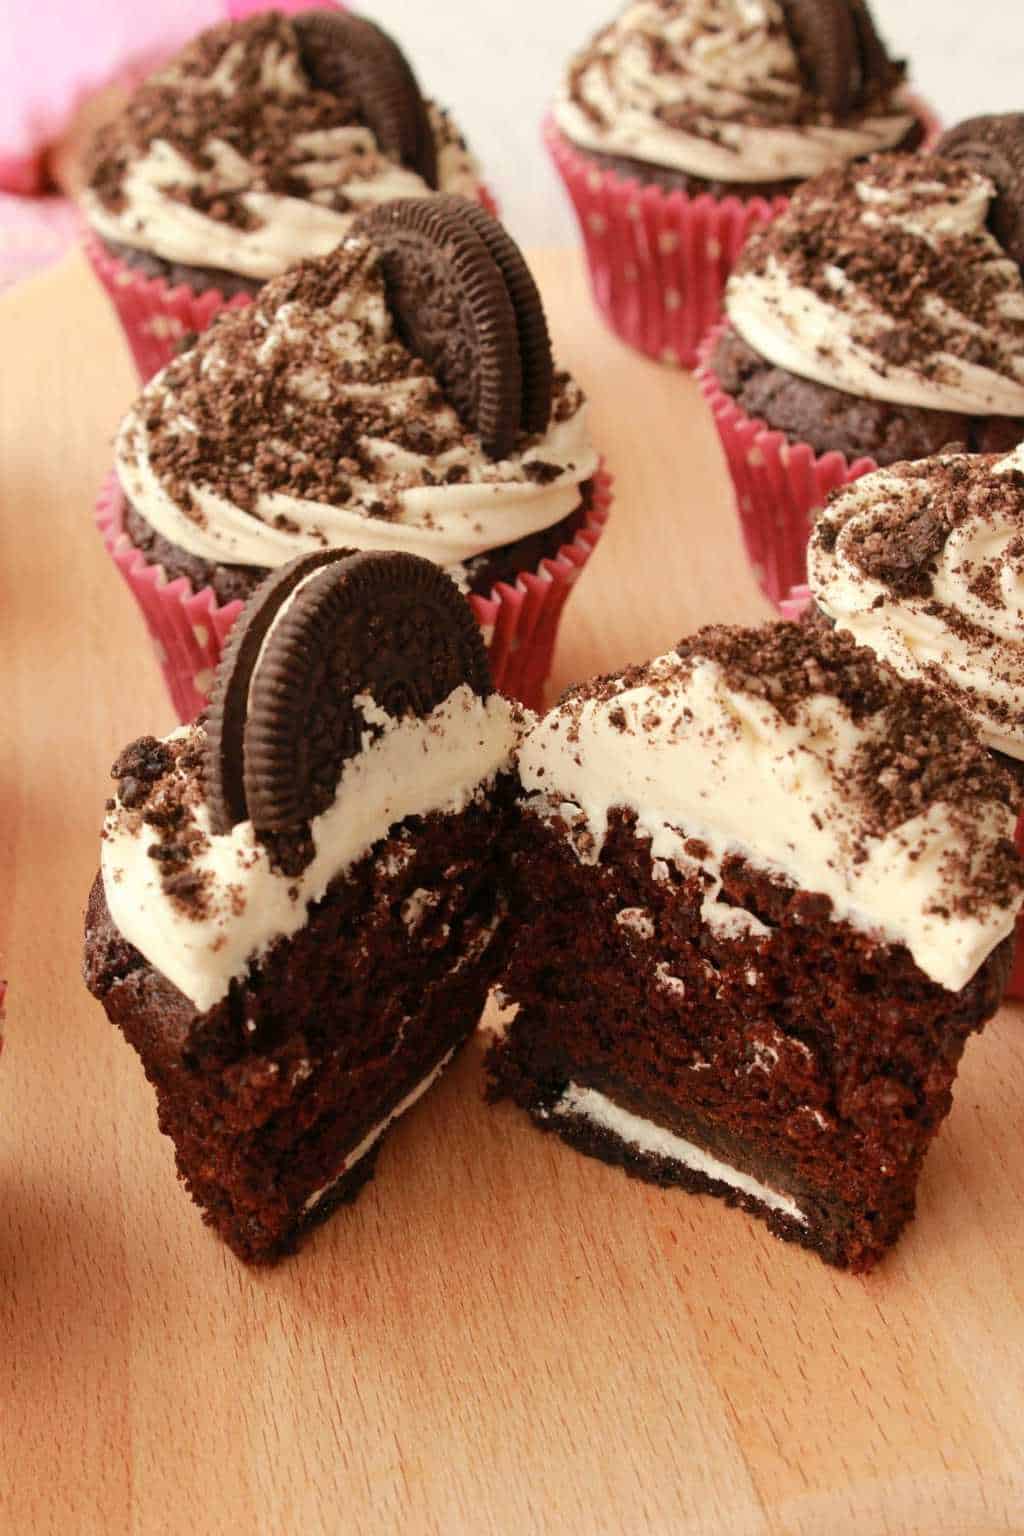 An oreo cupcake cut in half to show the center. 